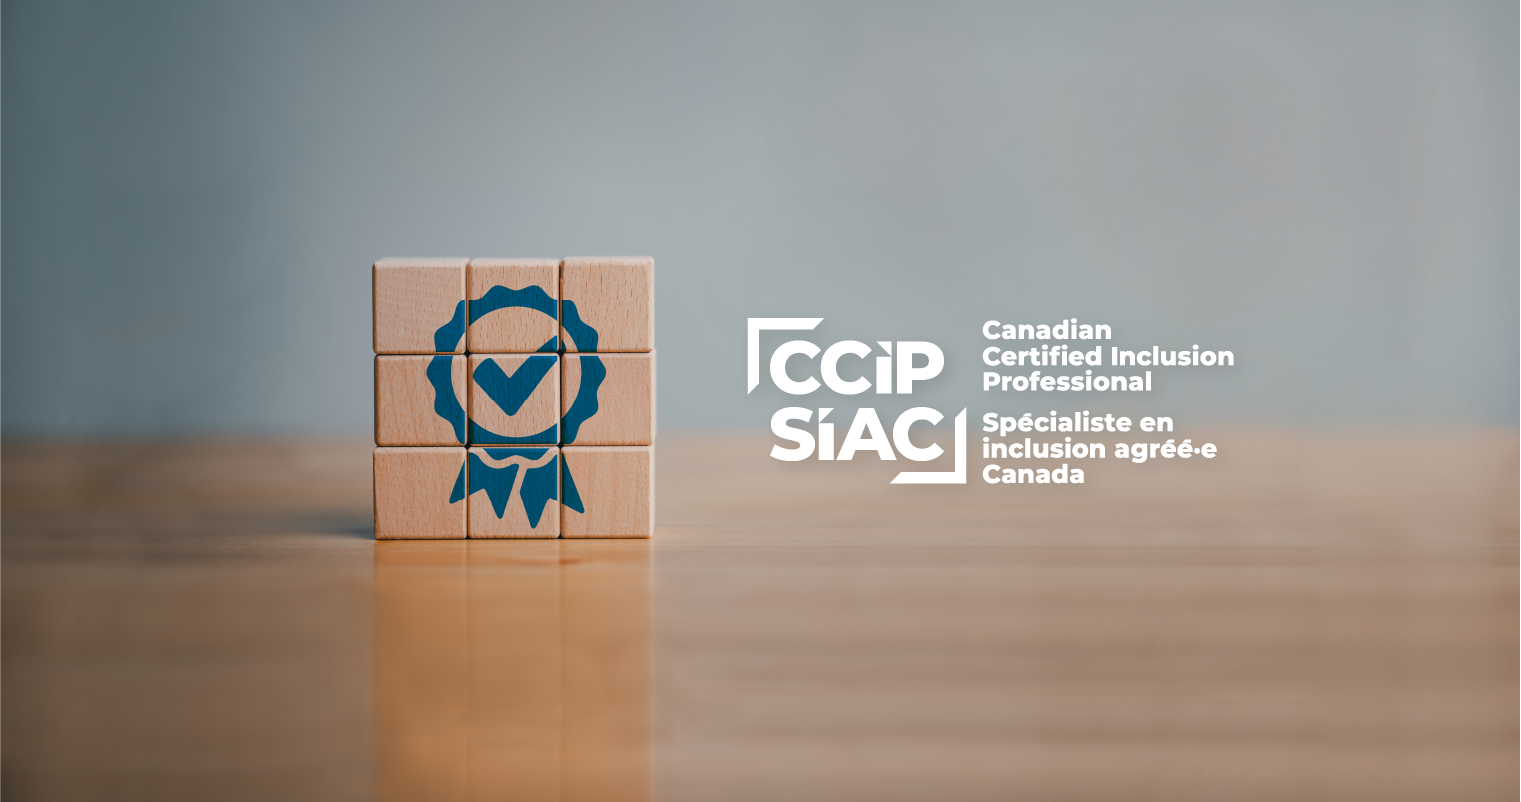 Canadian Certified Inclusion Professional (CCIP™)